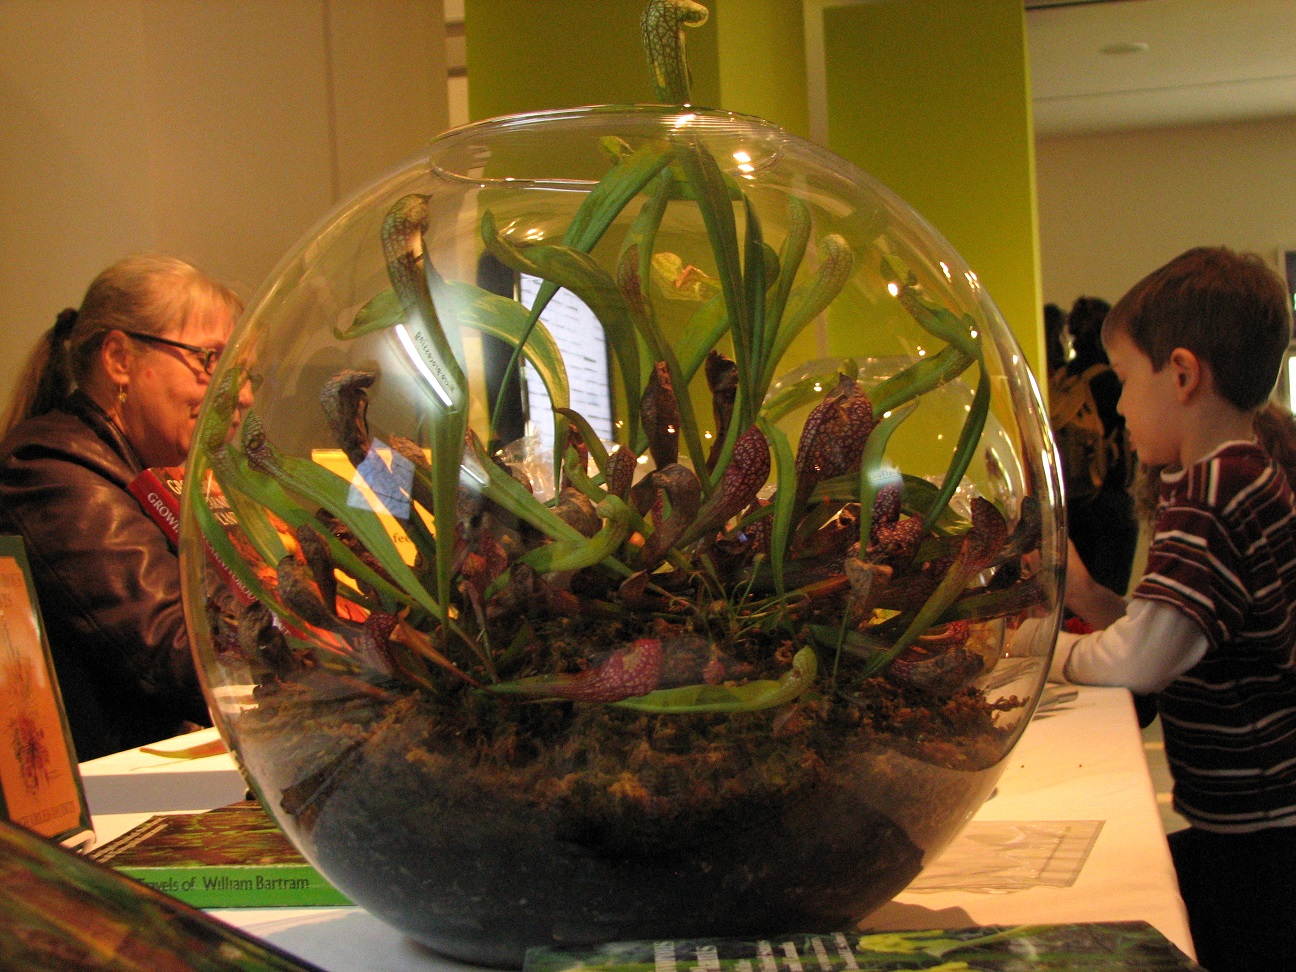 List of essential components of a terrarium